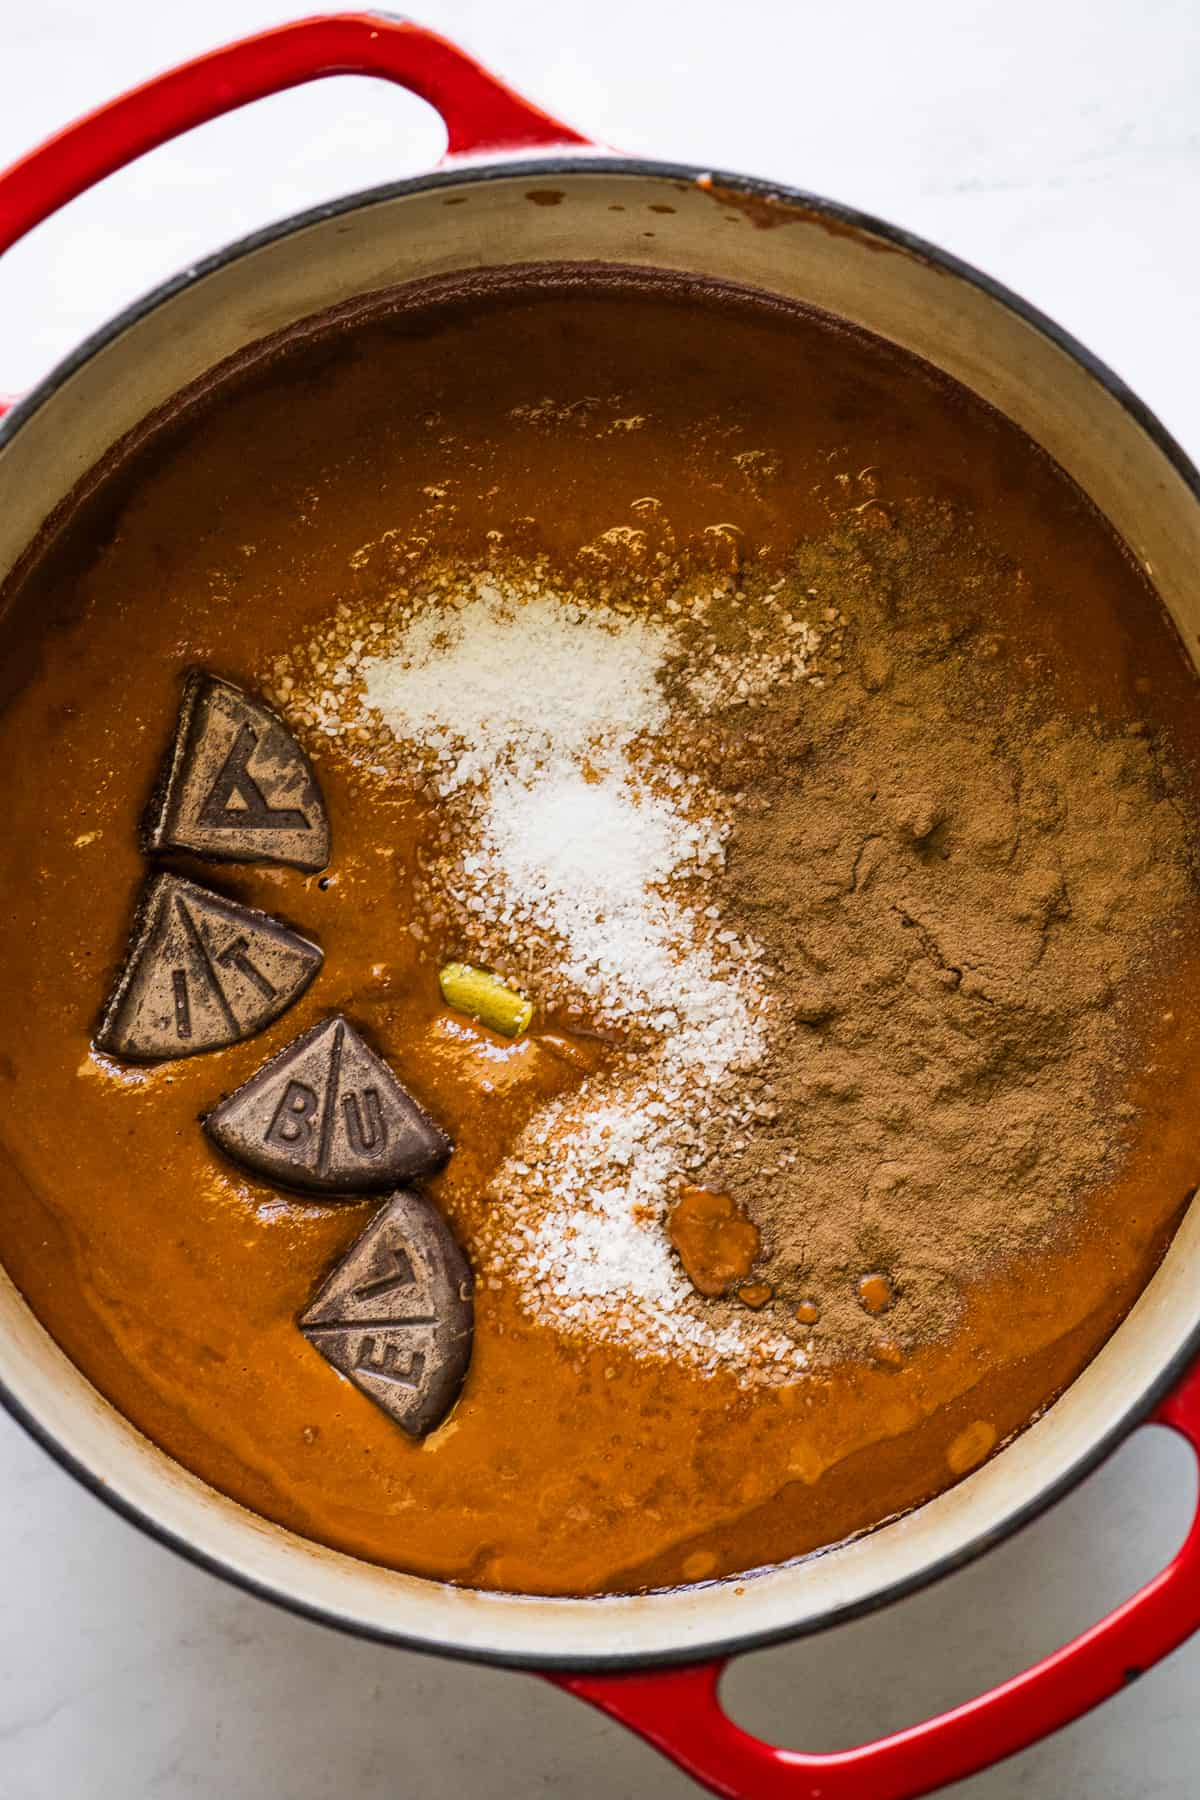 Mole sauce in a pot being combined with Mexican chocolate, cinnamon, and more.